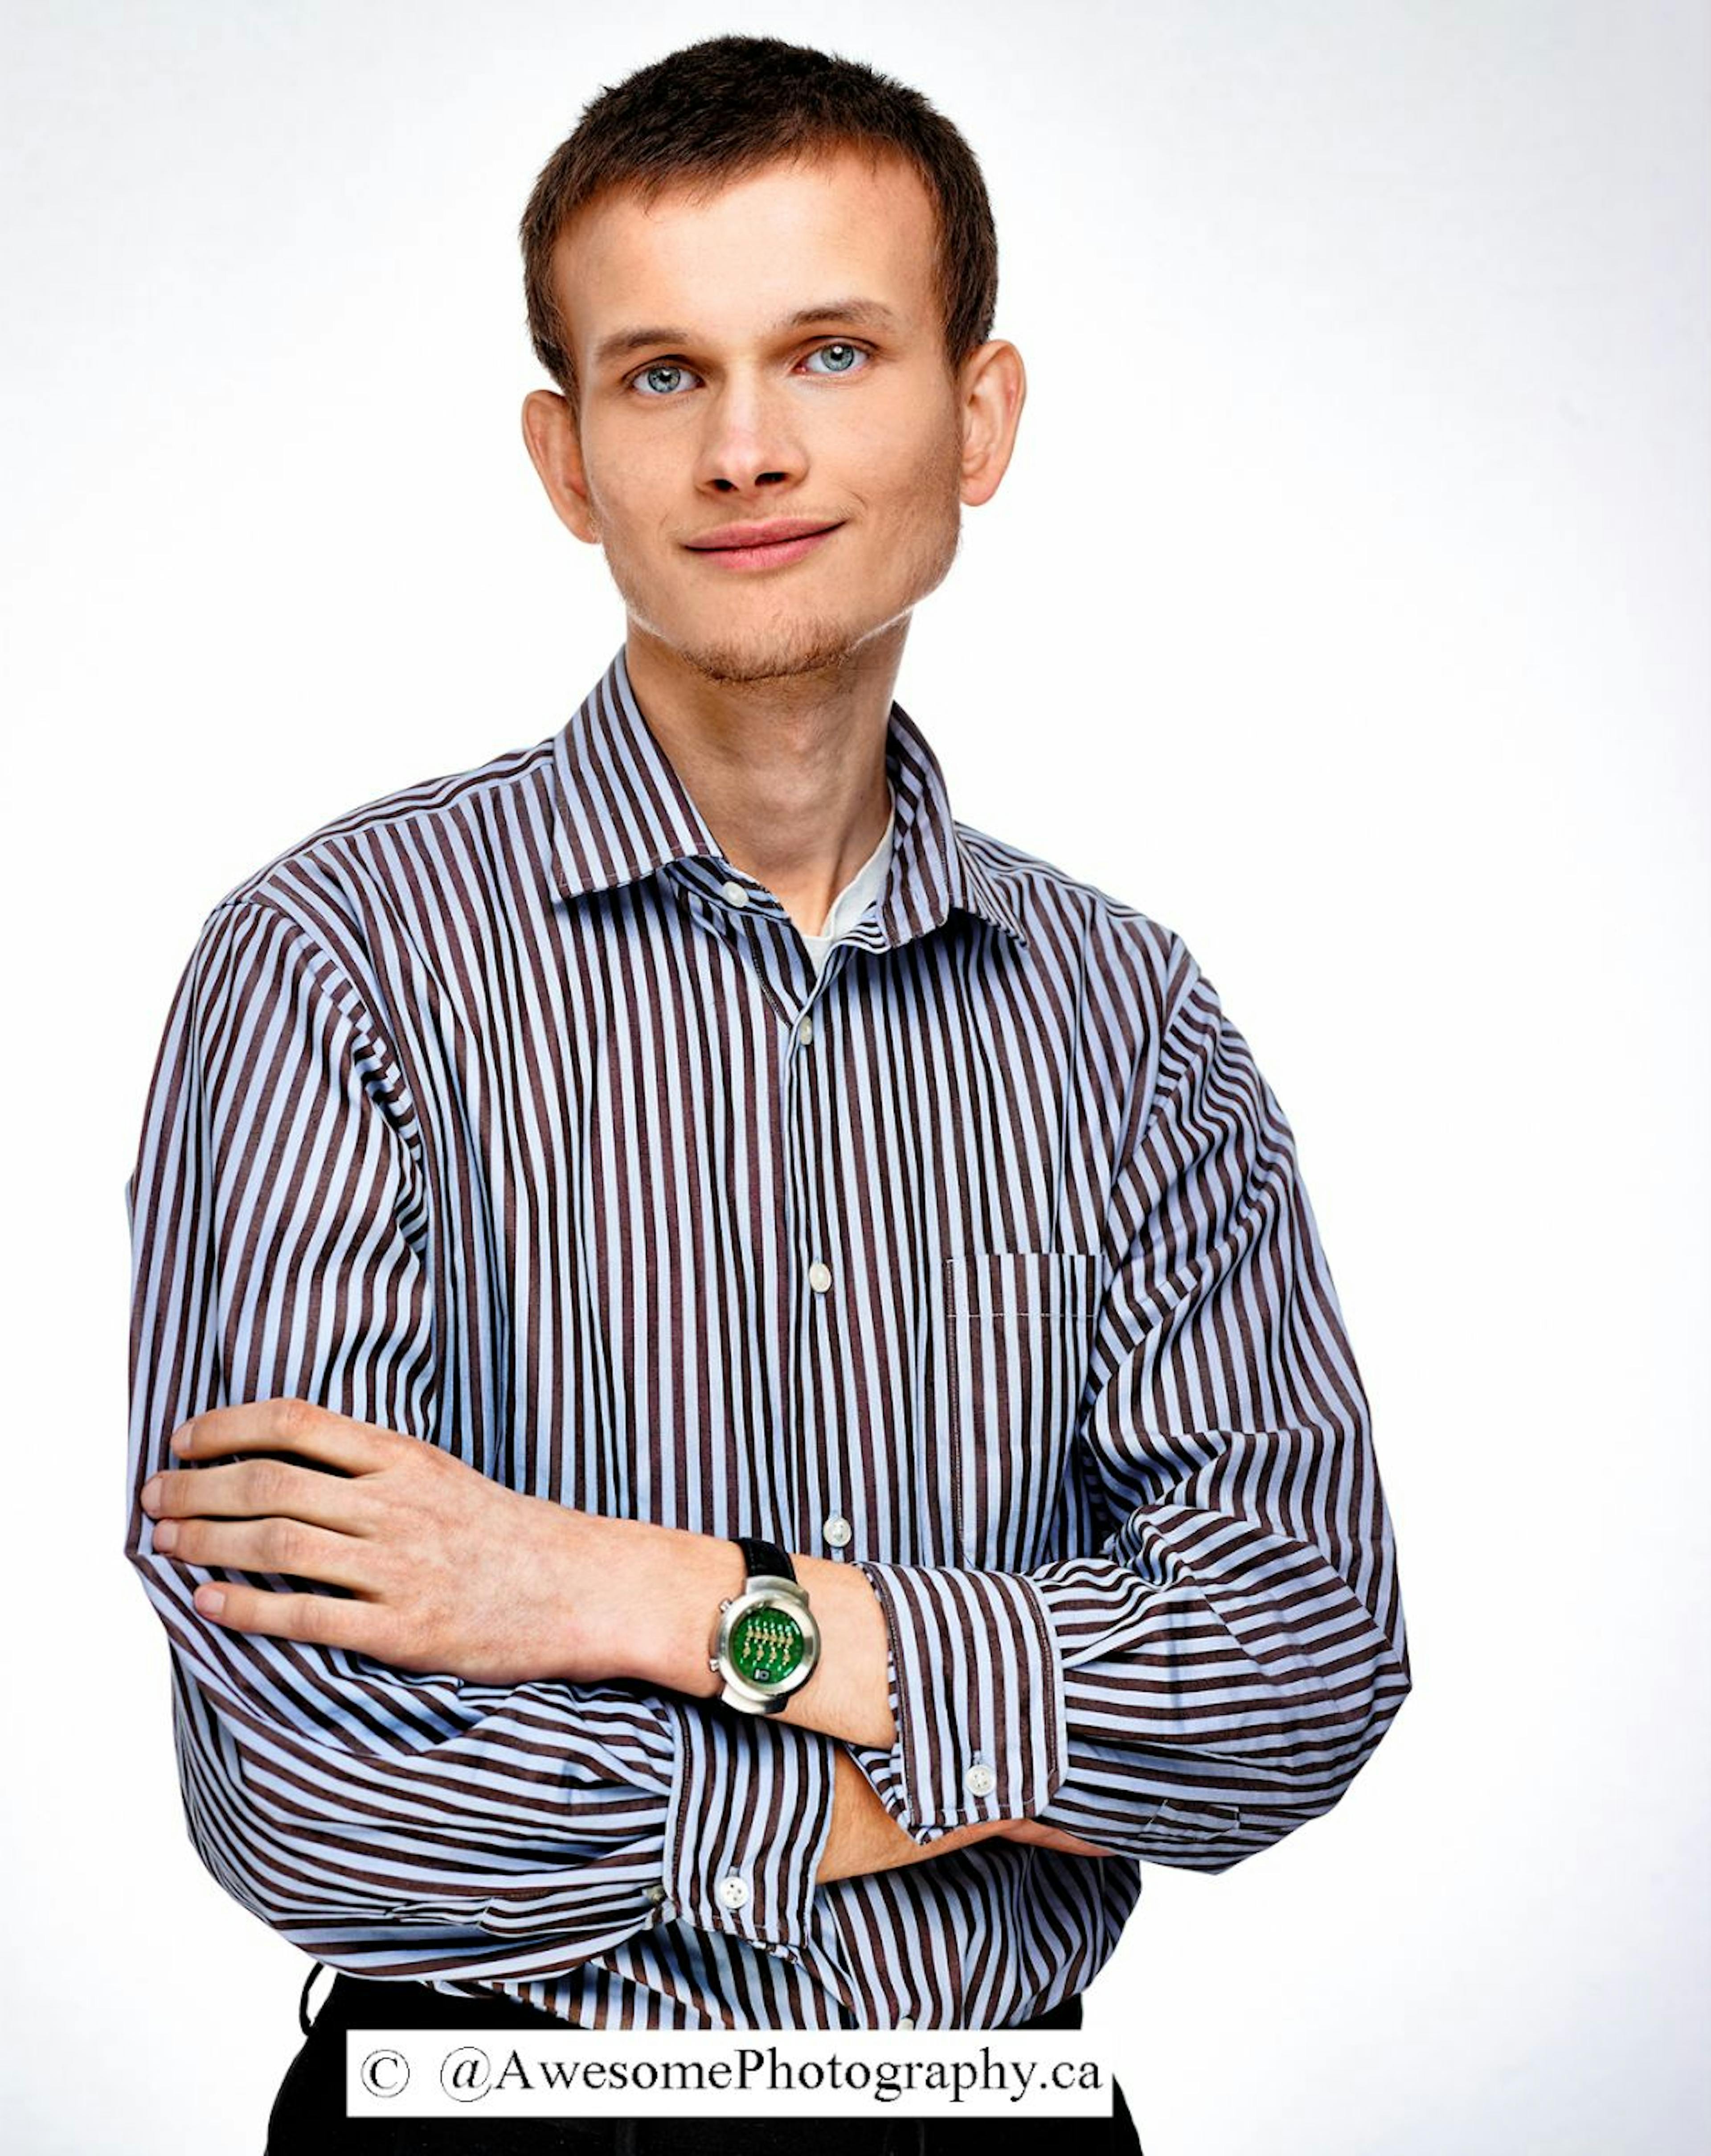 Photo Source: All Rights Reserved, used with permission by Andrew Miller for a HackerNoon.com Exclusive. To celebrate Ethereum's 10th anniversary, renowned Canadian photographer Andrew Miller recently unveiled the auction of the never-before-sold portrait of Vitalik Buterin. The iconic image captures the essence of Buterin's visionary spirit; the image, the copyright, legal rights, and various copyright immunities will be sold as an NFT during an exclusive auction throughout July at www.EthereumGenesis.com or https://gallery.manifold.xyz/ethereumgenesis.